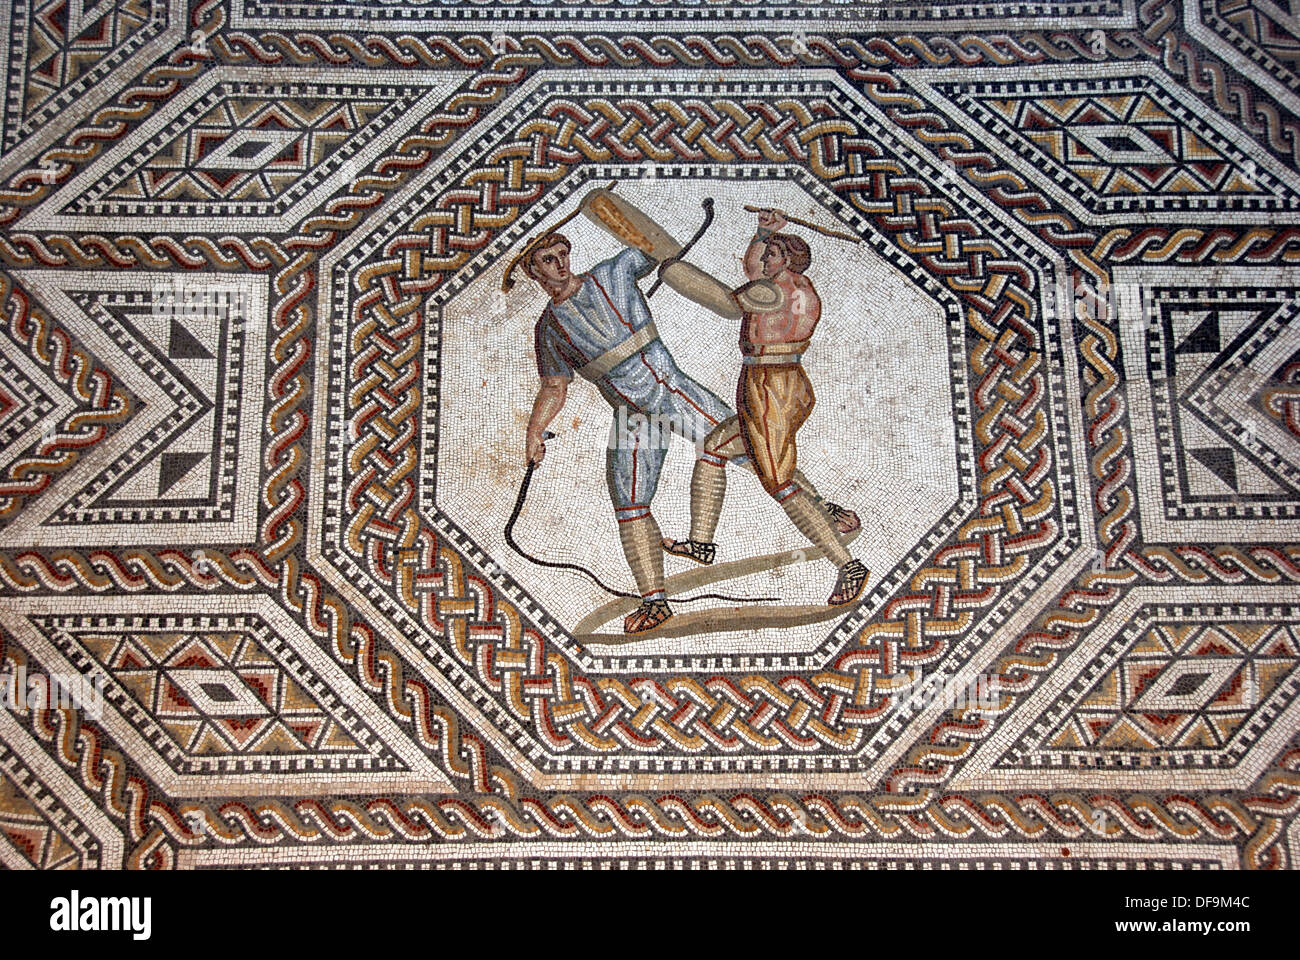 Fighters - detail from Roman mosaic floor, Mosel valley, Nennig, Saarland,Germany. Stock Photo